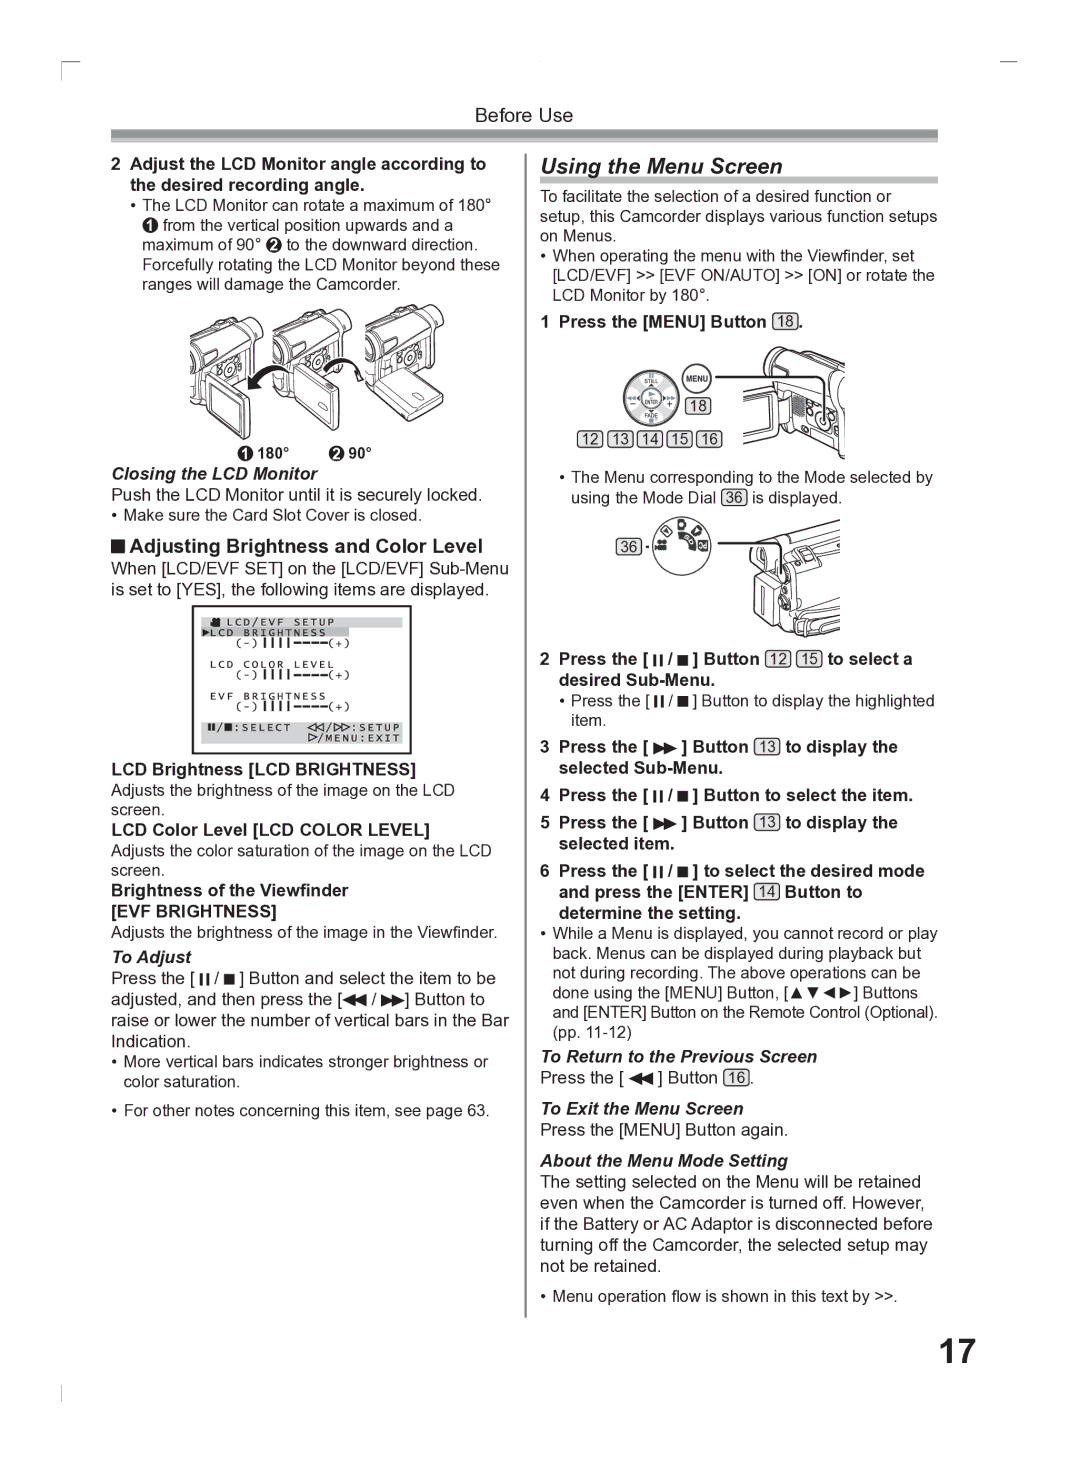 Panasonic PV-GS2 operating instructions Using the Menu Screen, Adjusting Brightness and Color Level 